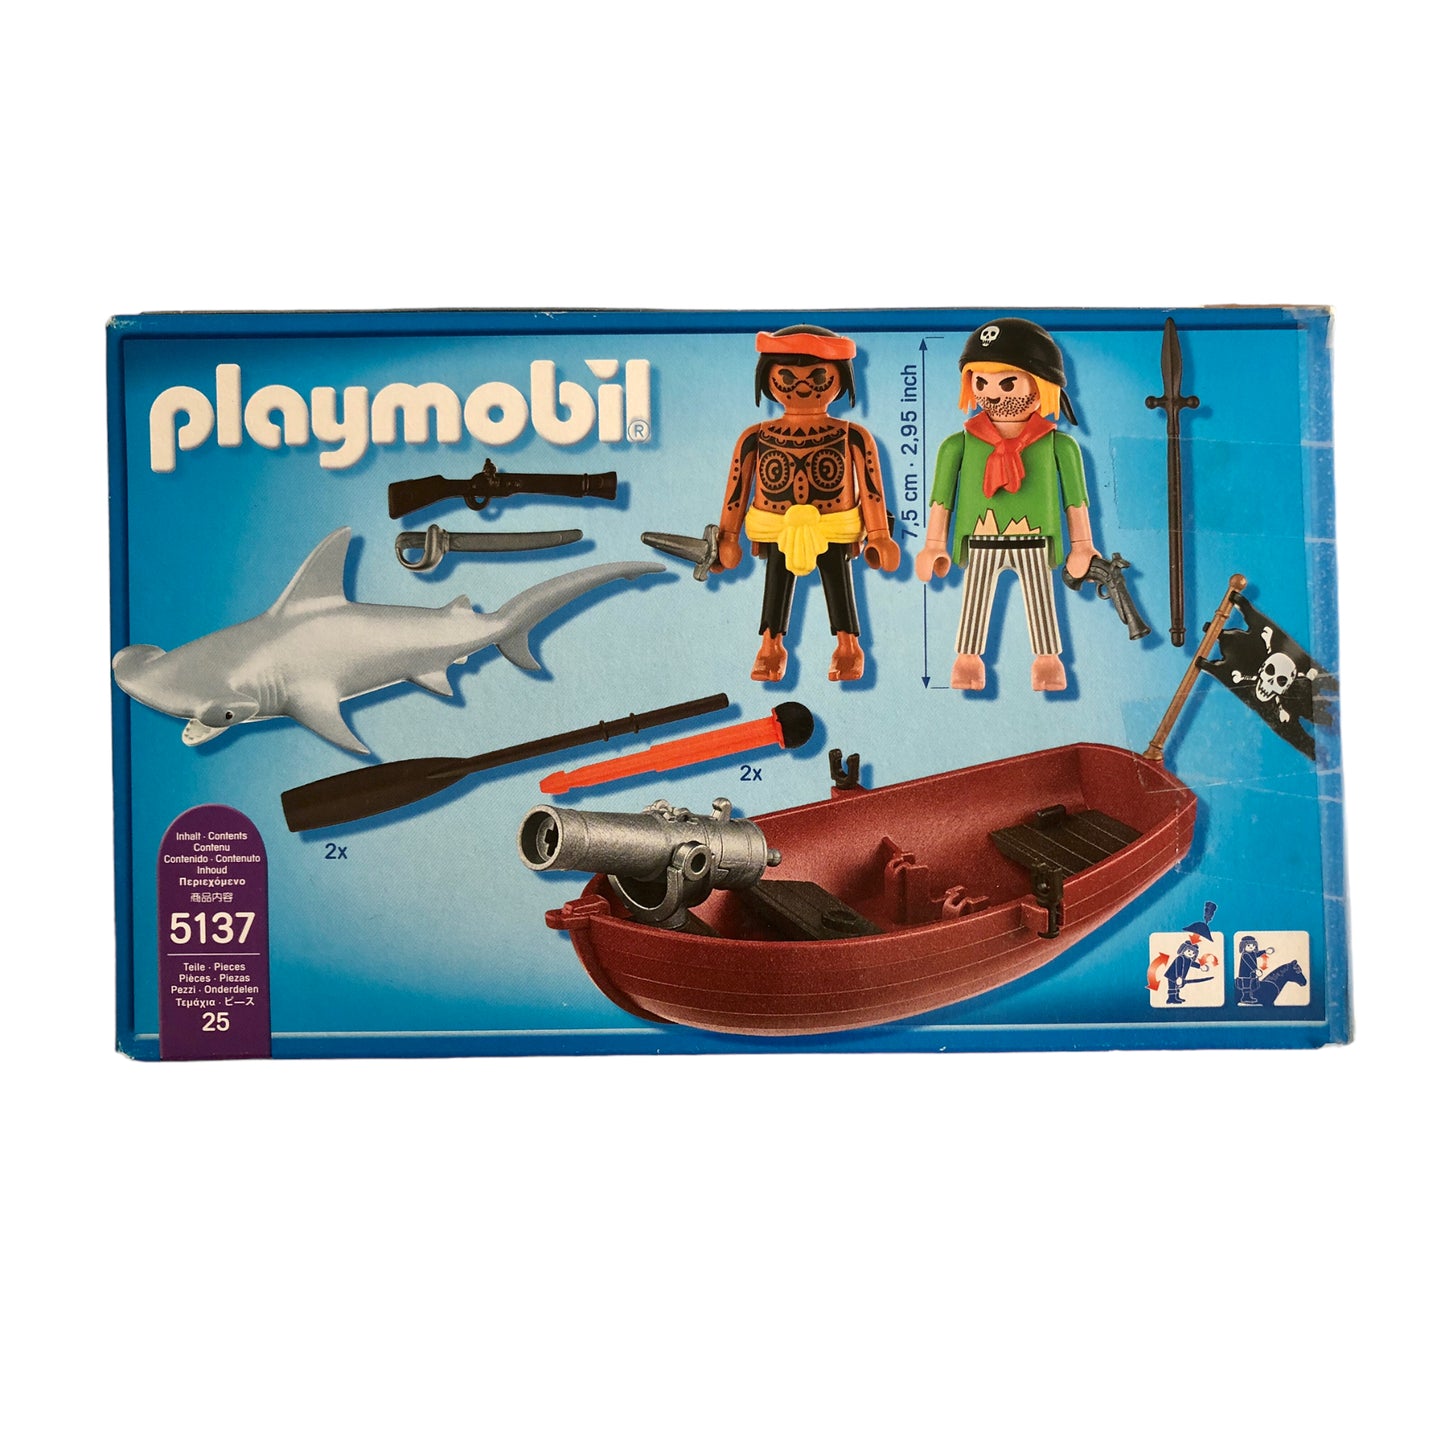 Playmobil - Pirate boat with hammerhead shark